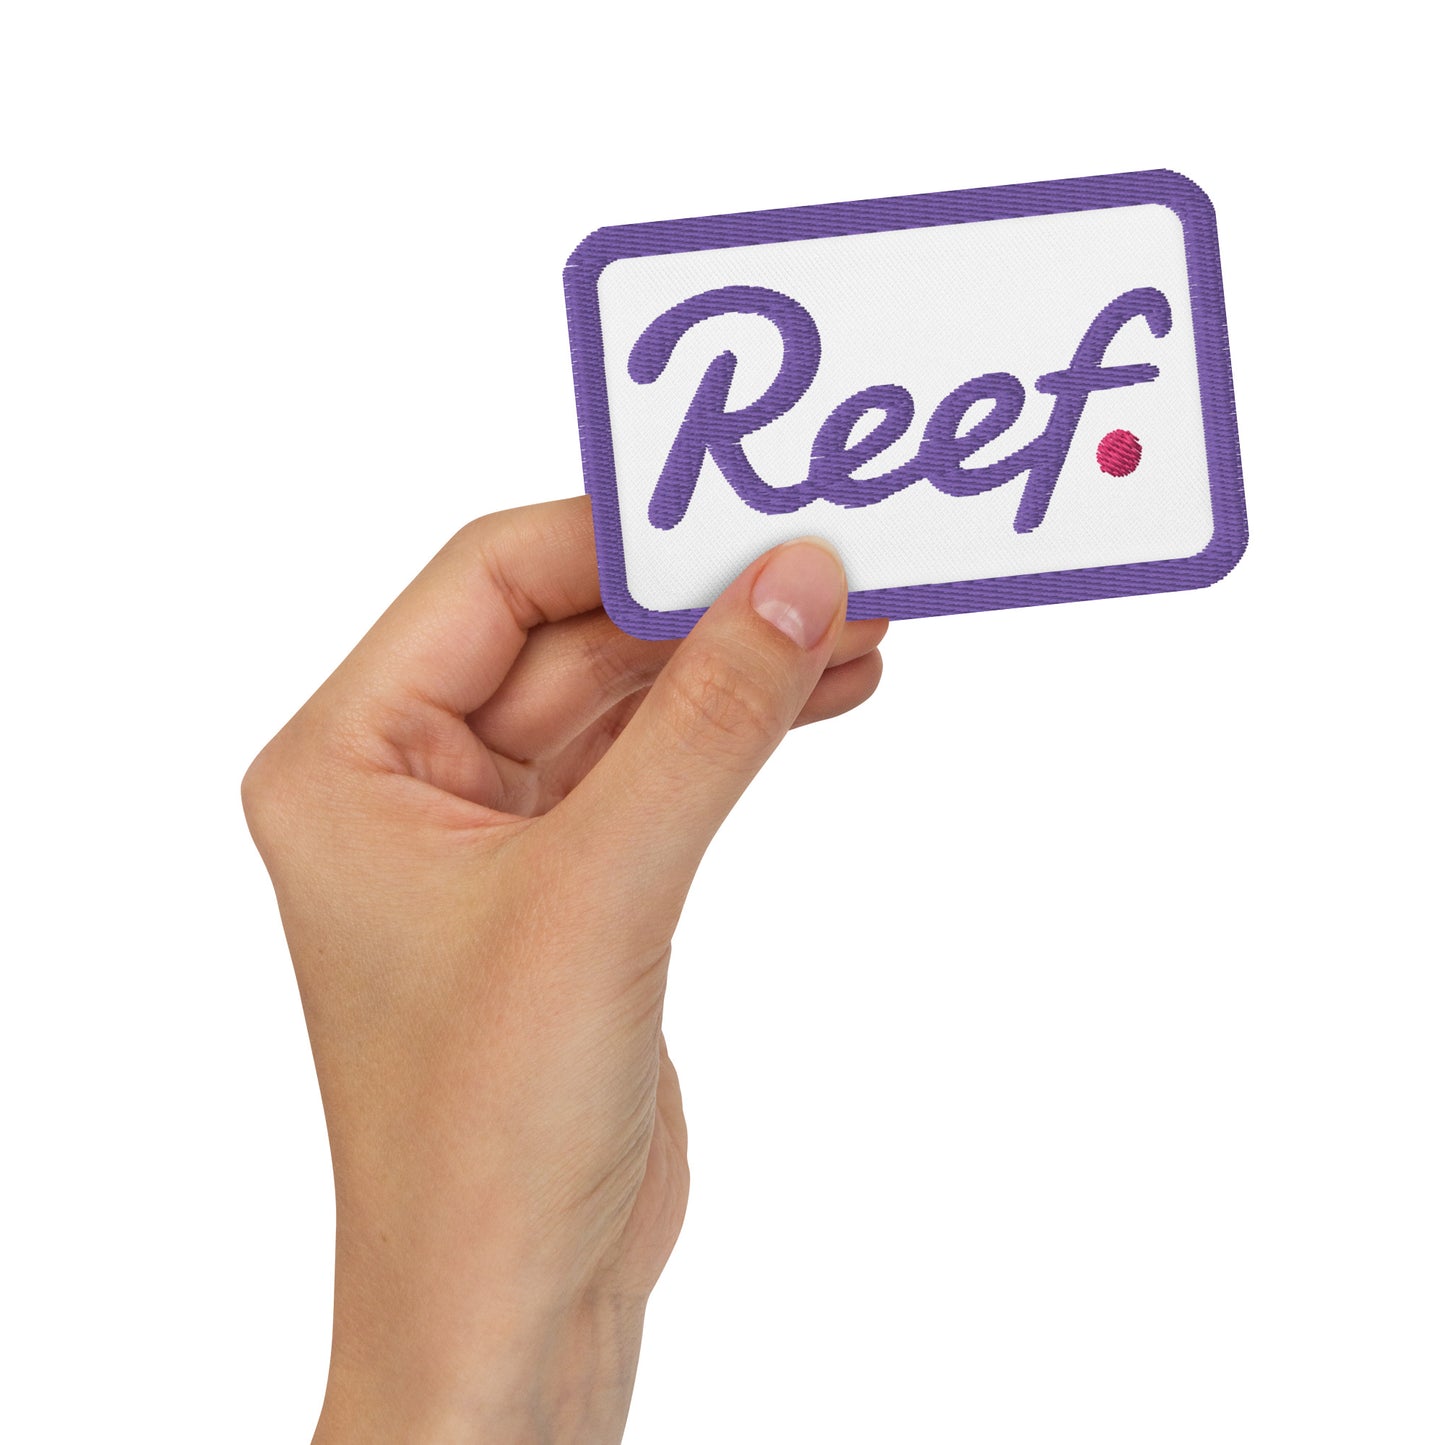 Reef embroidered patches (purple)